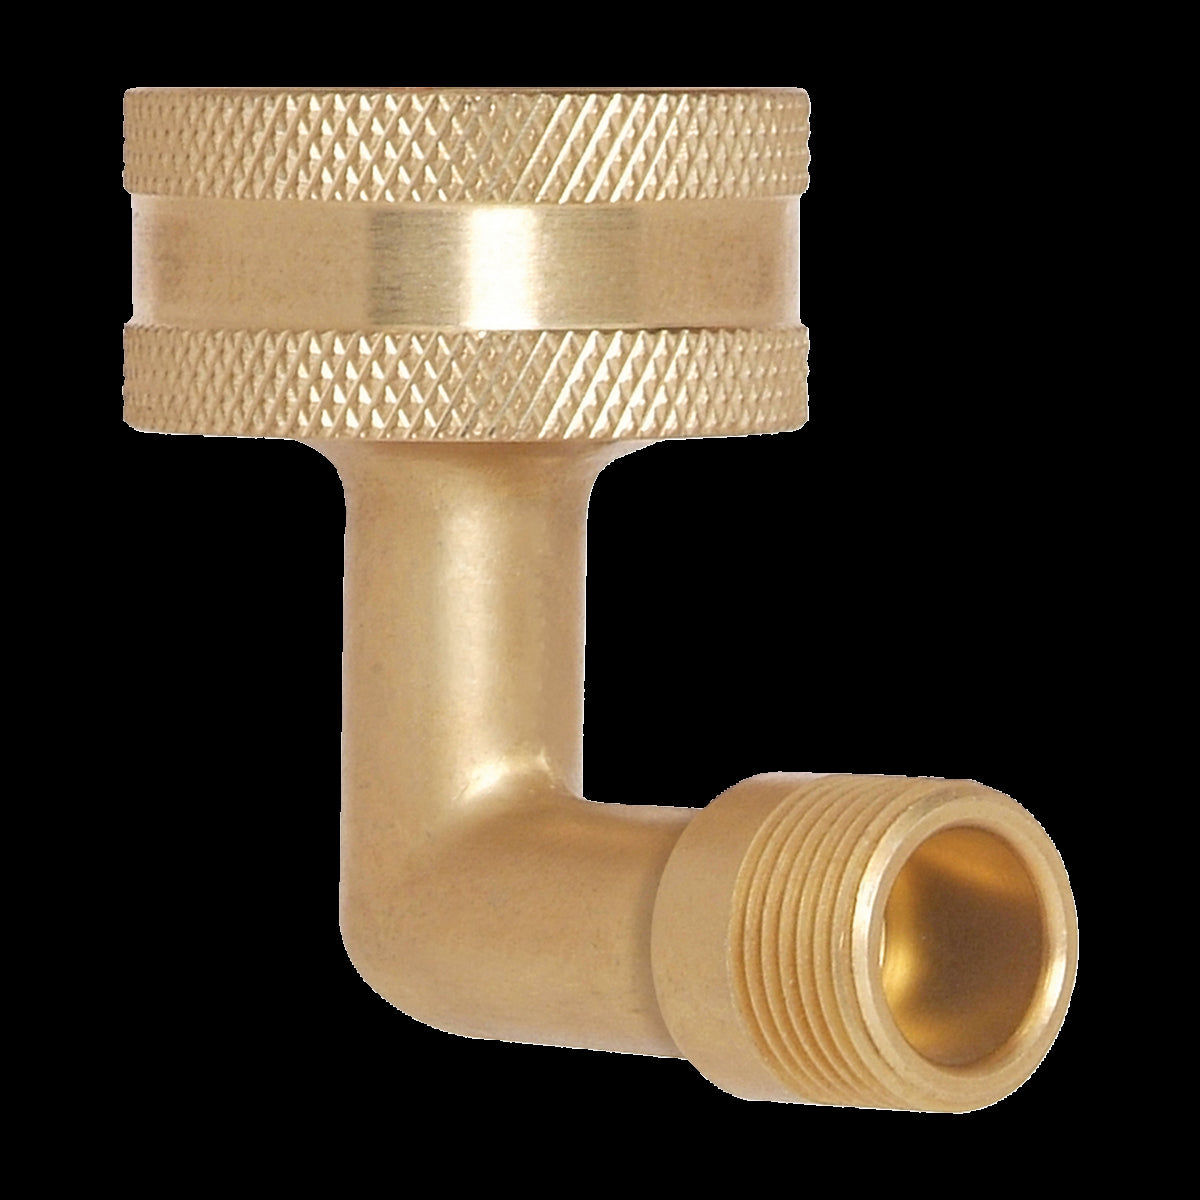 HES-6-12X - Dishwasher Elbow - 3/8" OD Comp x 3/4" Garden Hose with Washer